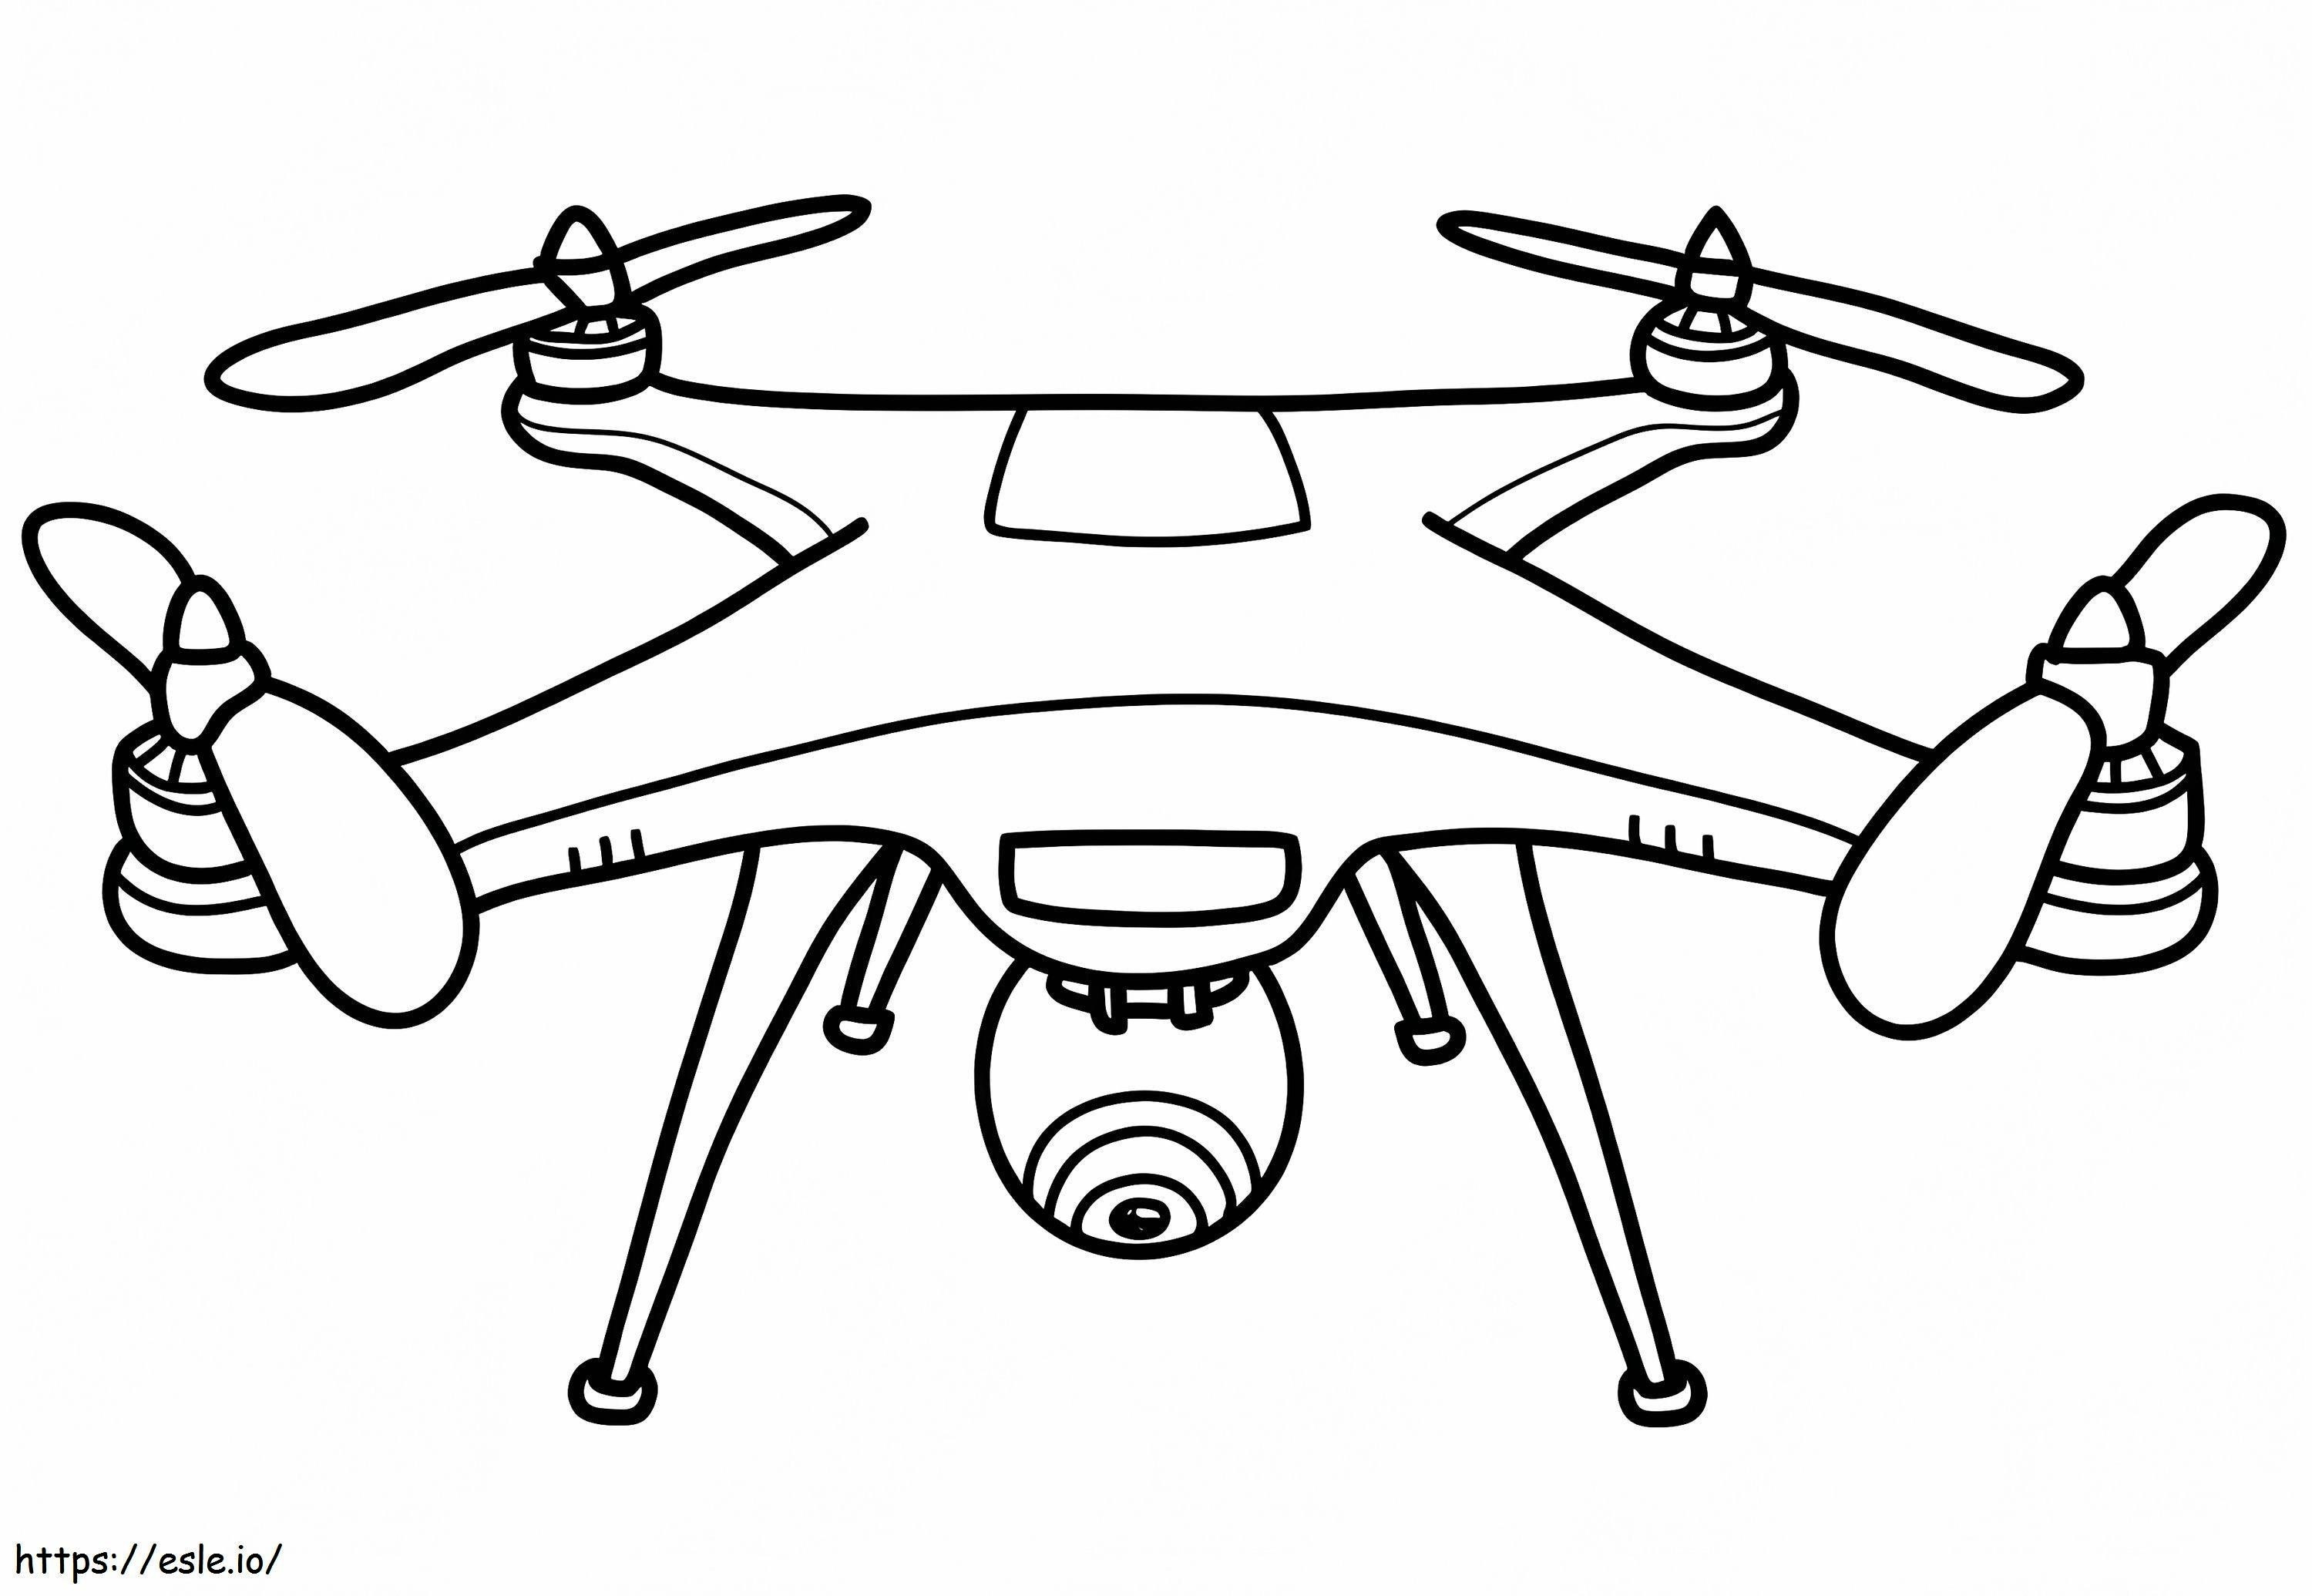 Drone With Camera coloring page